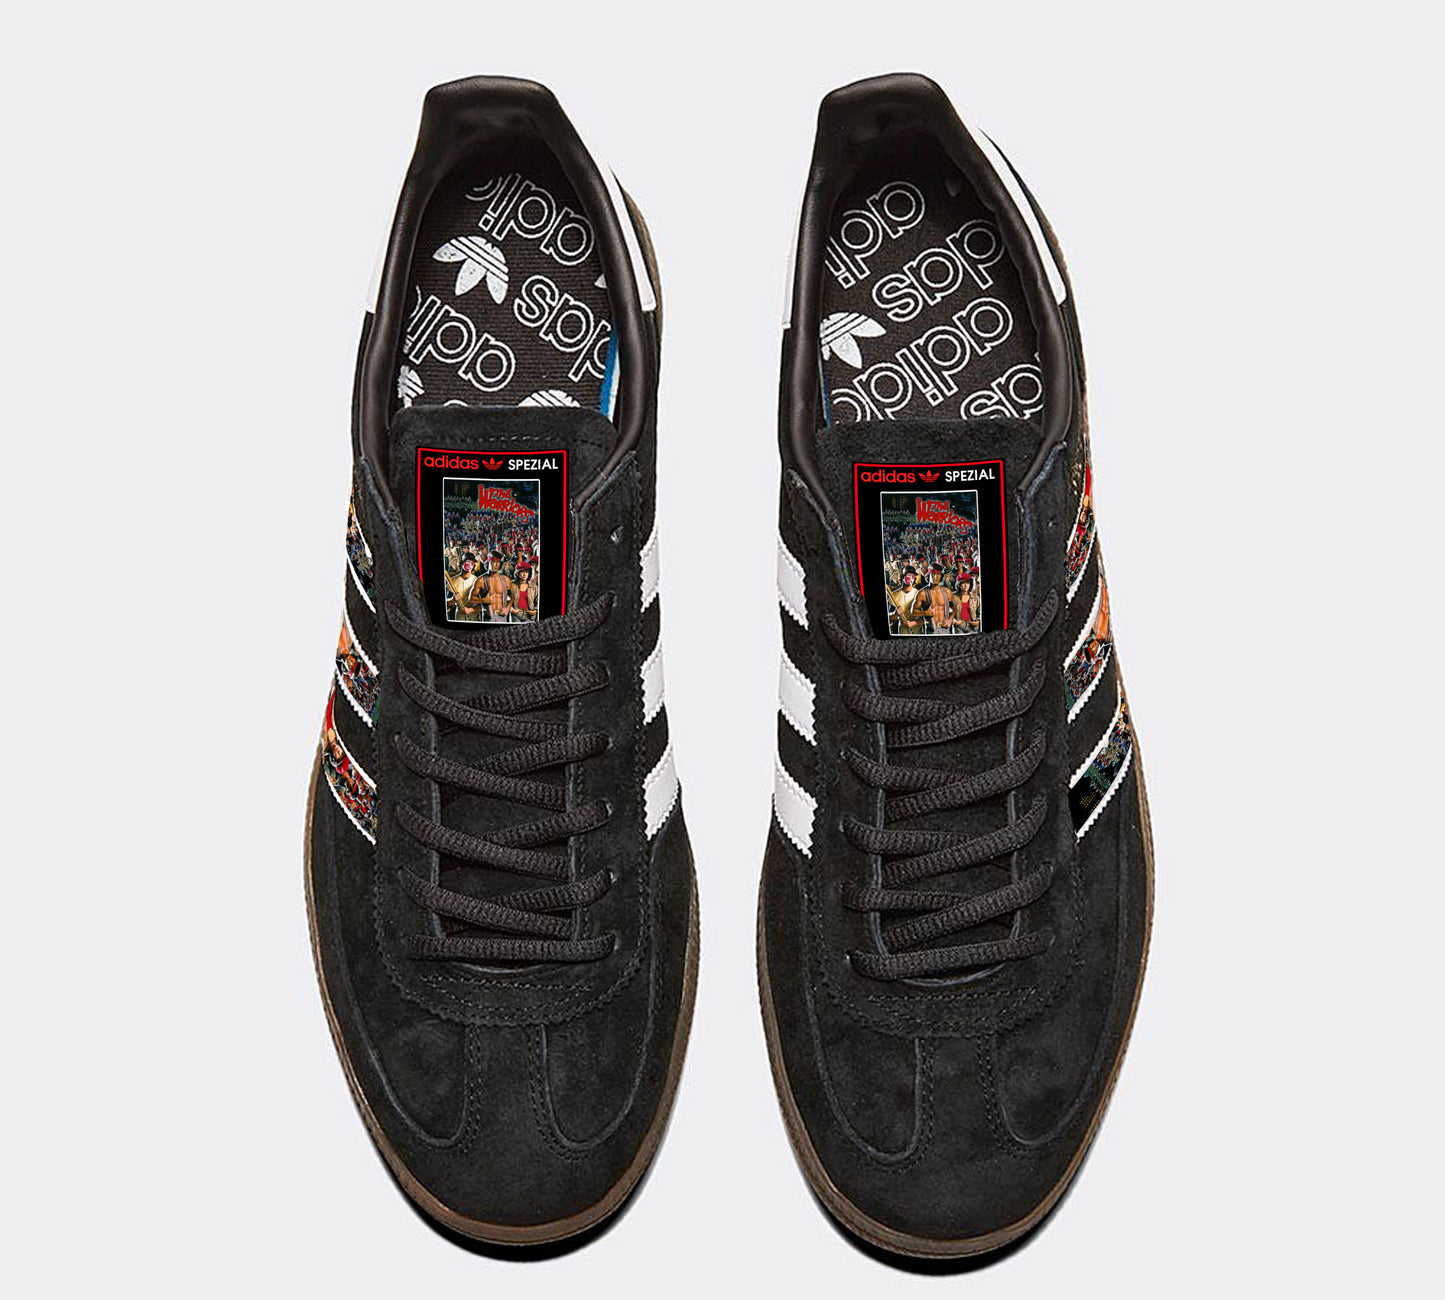 Limited edition The Warriors Movie Adidas Handball Spezial Black / Red / White trainers / sneakers